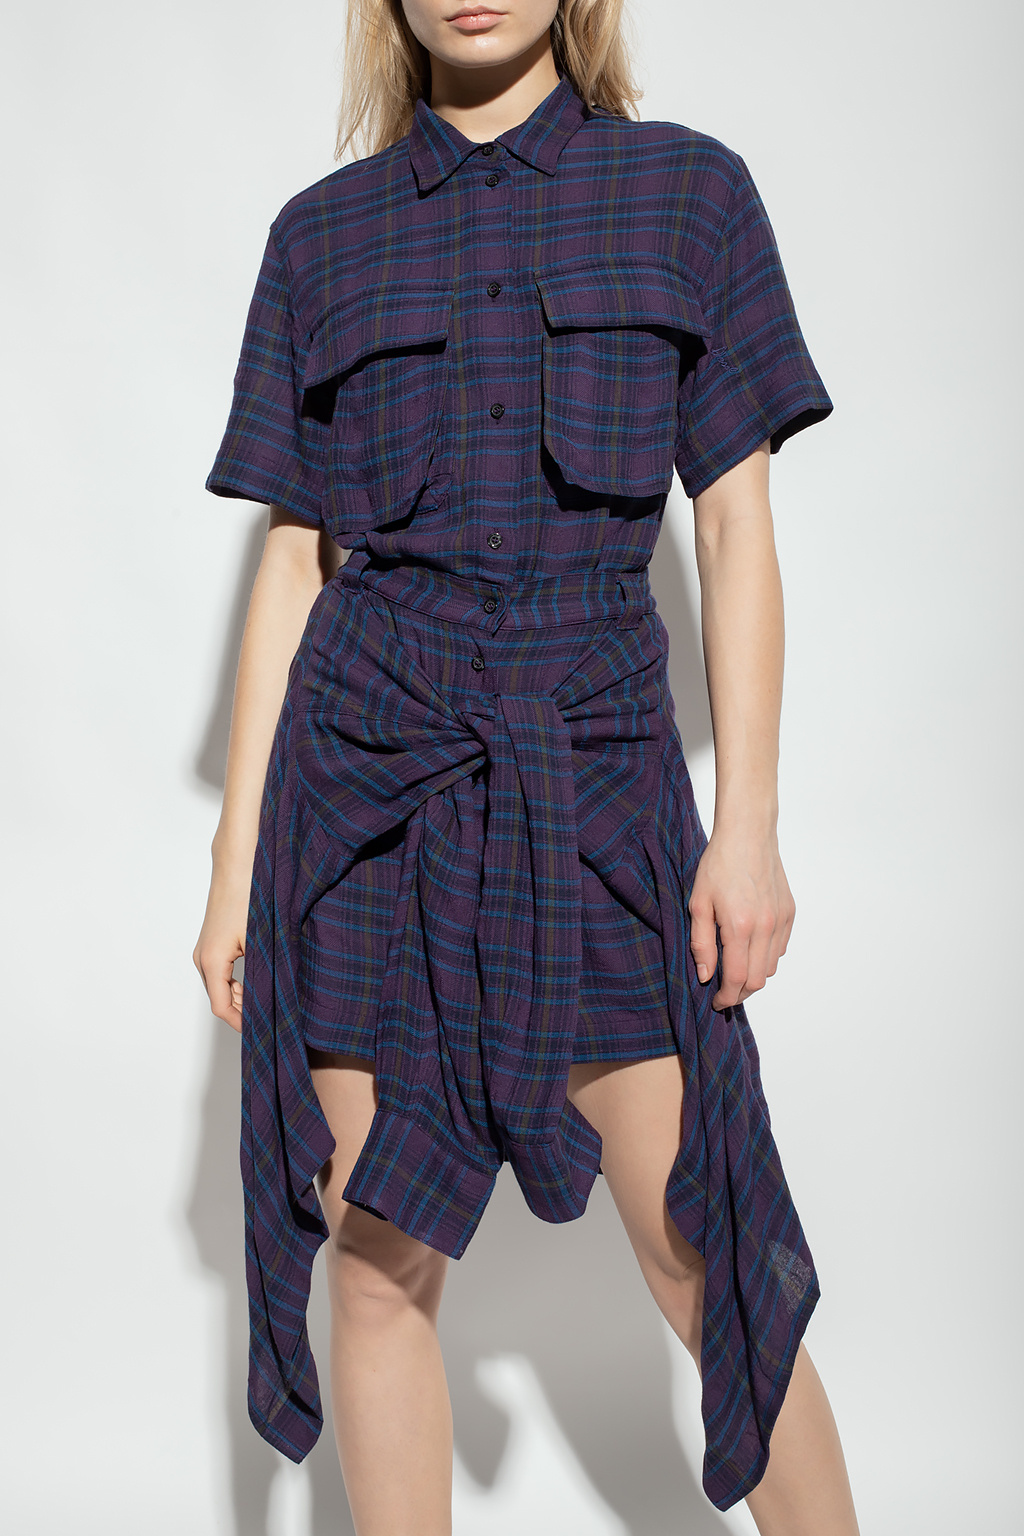 Diesel Checked dress, Women's Clothing